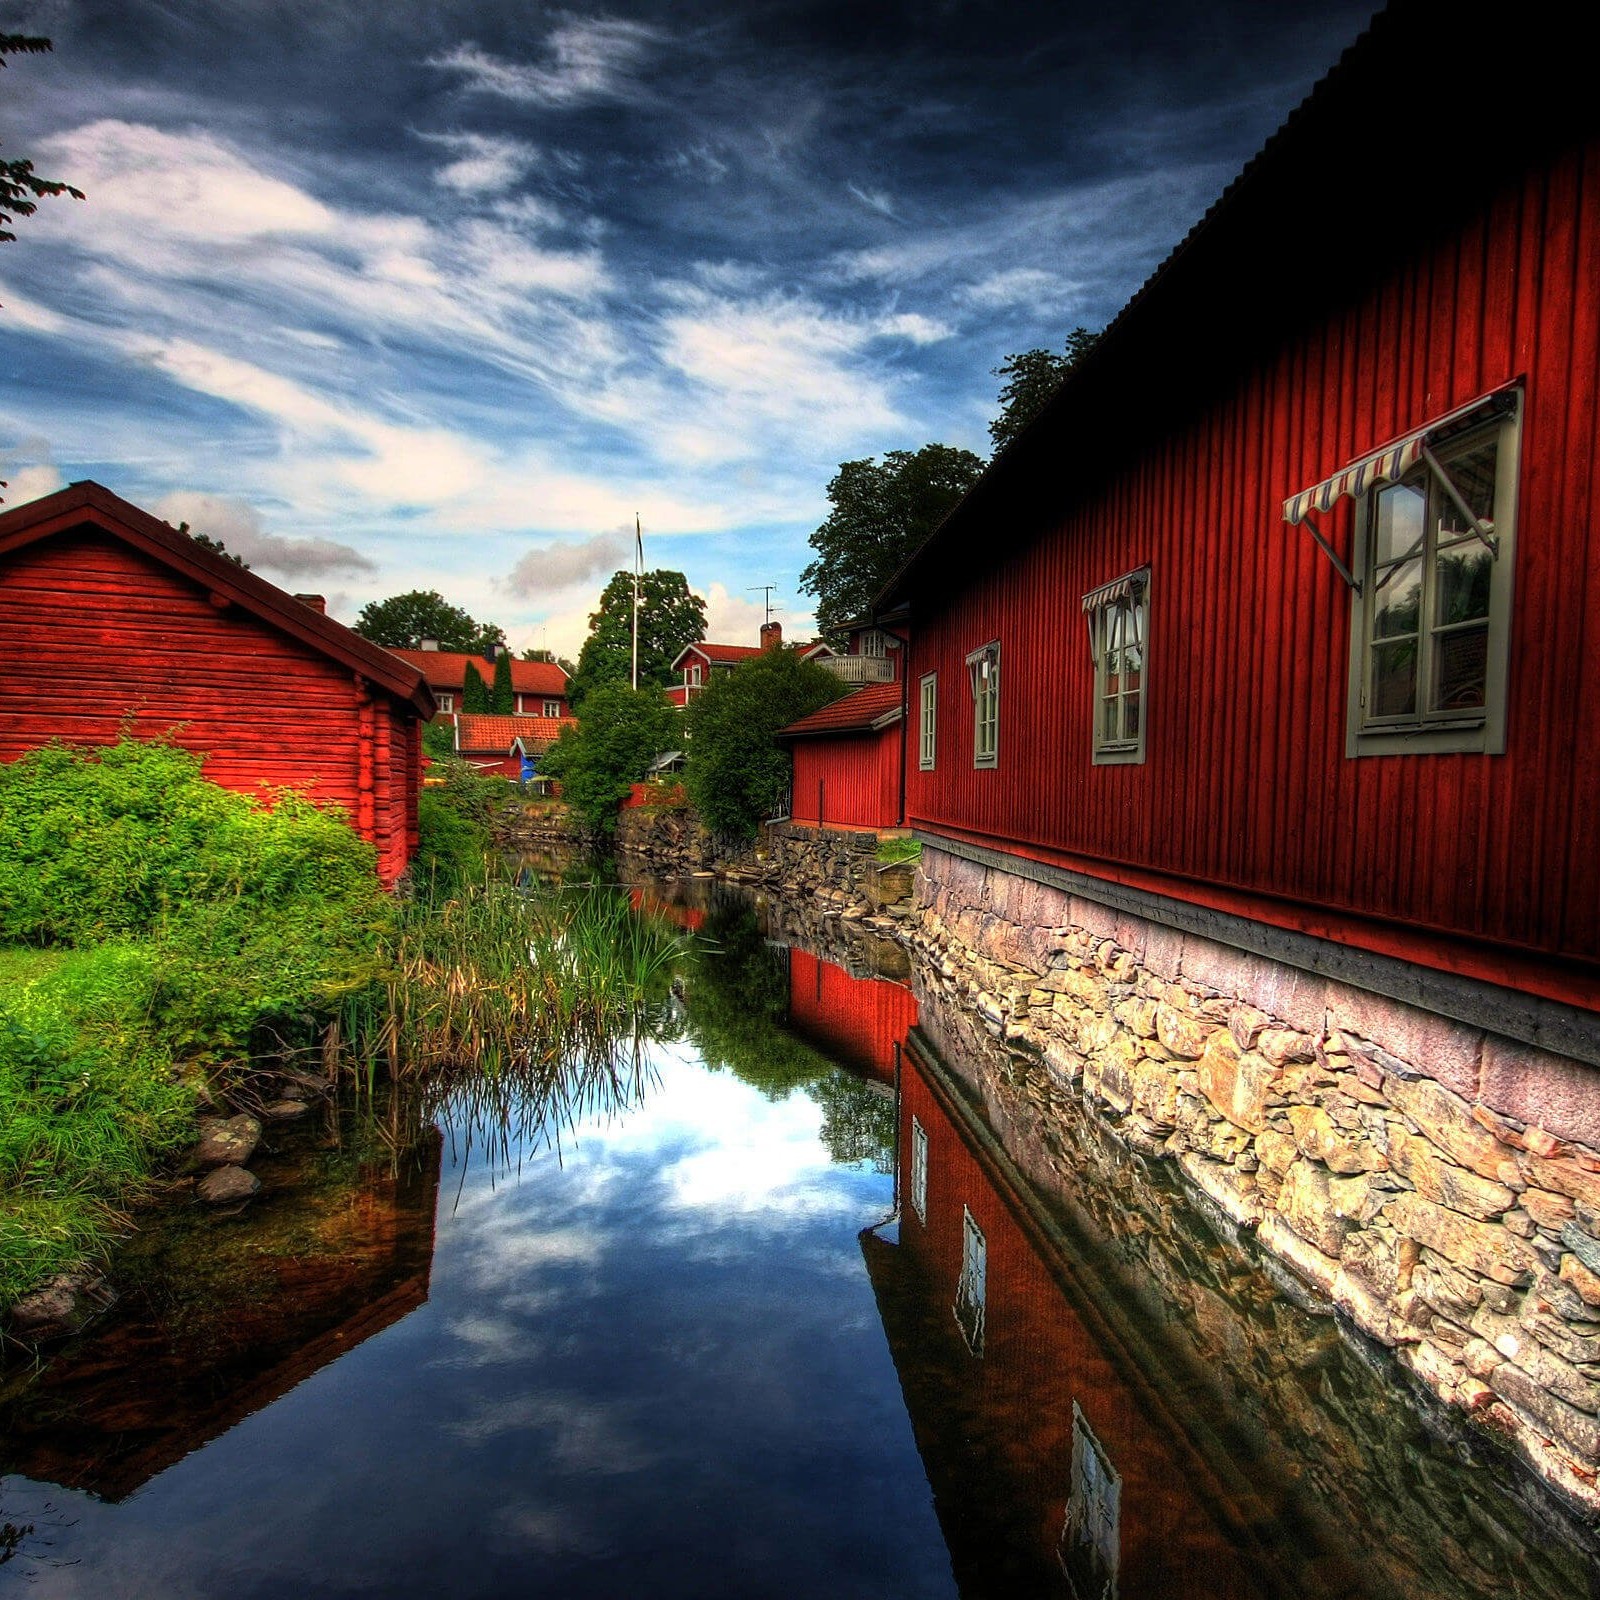 Red Village, Norberg, Sweden Wallpaper for Amazon Kindle Fire HDX 8.9